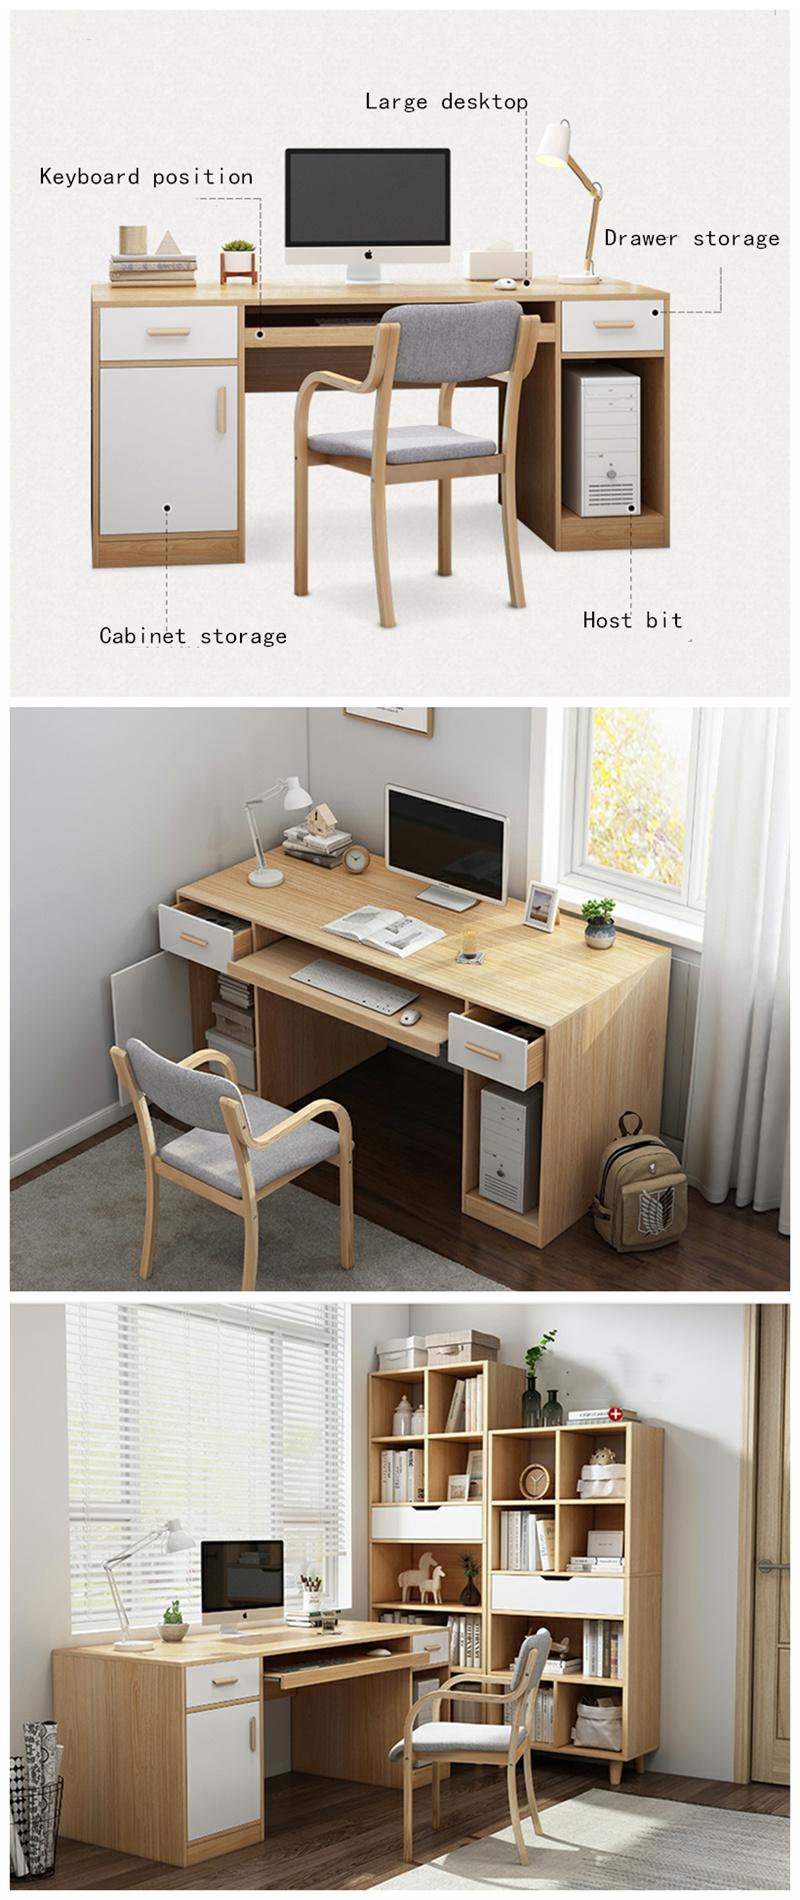 China Manufacturer Home Office Furniture Study Small Space Computer Table Laptop Desk